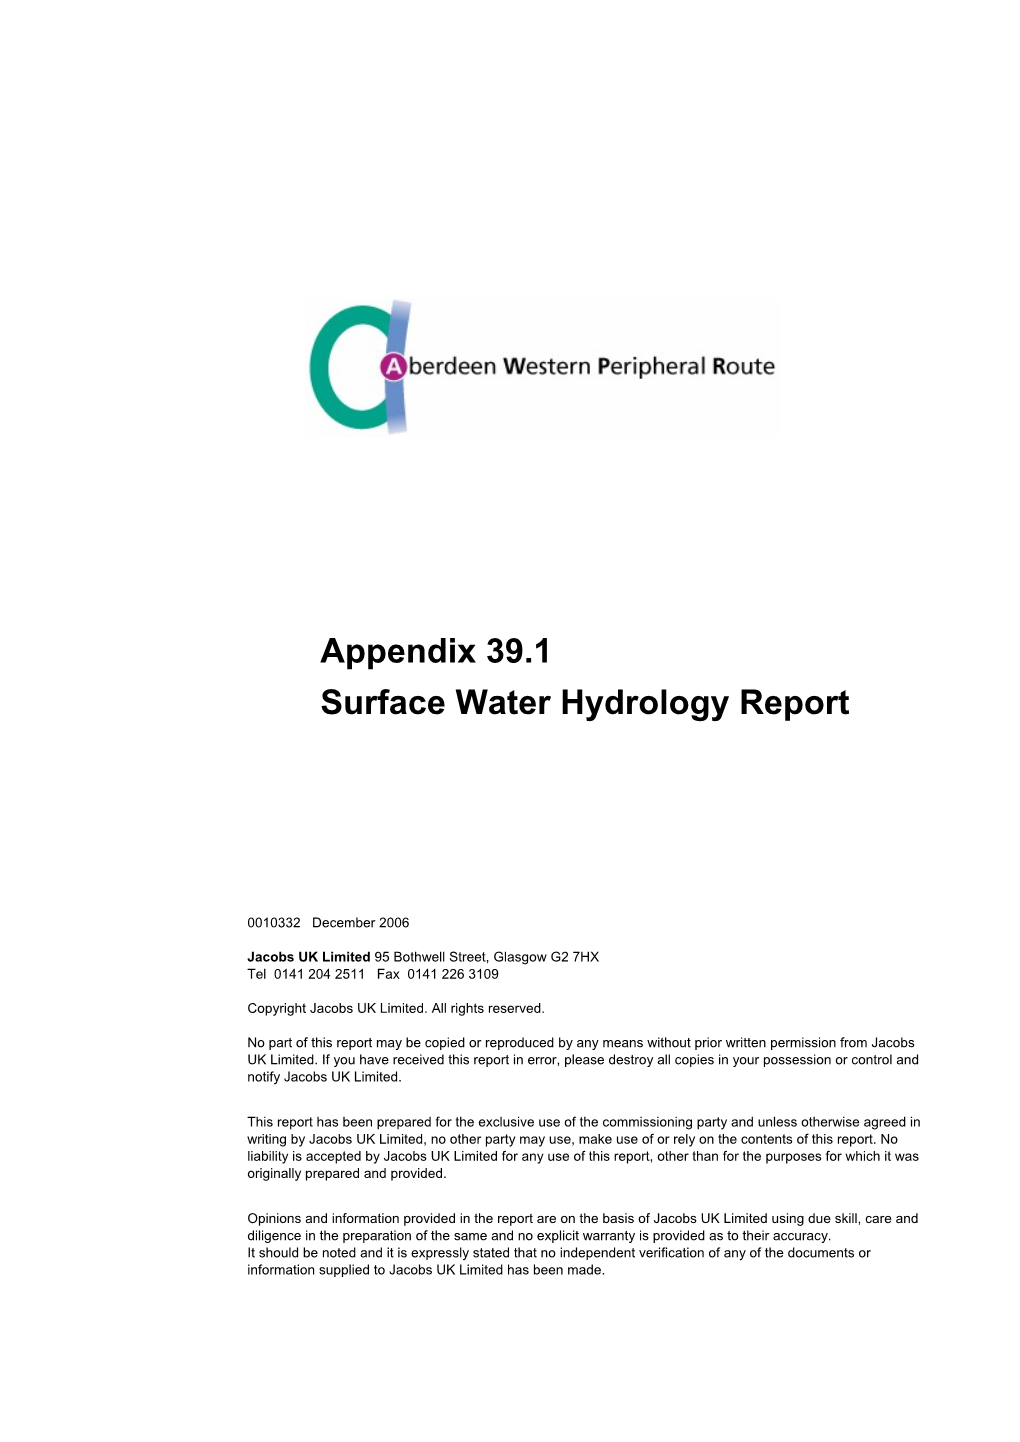 Appendix 39.1 Surface Water Hydrology Report